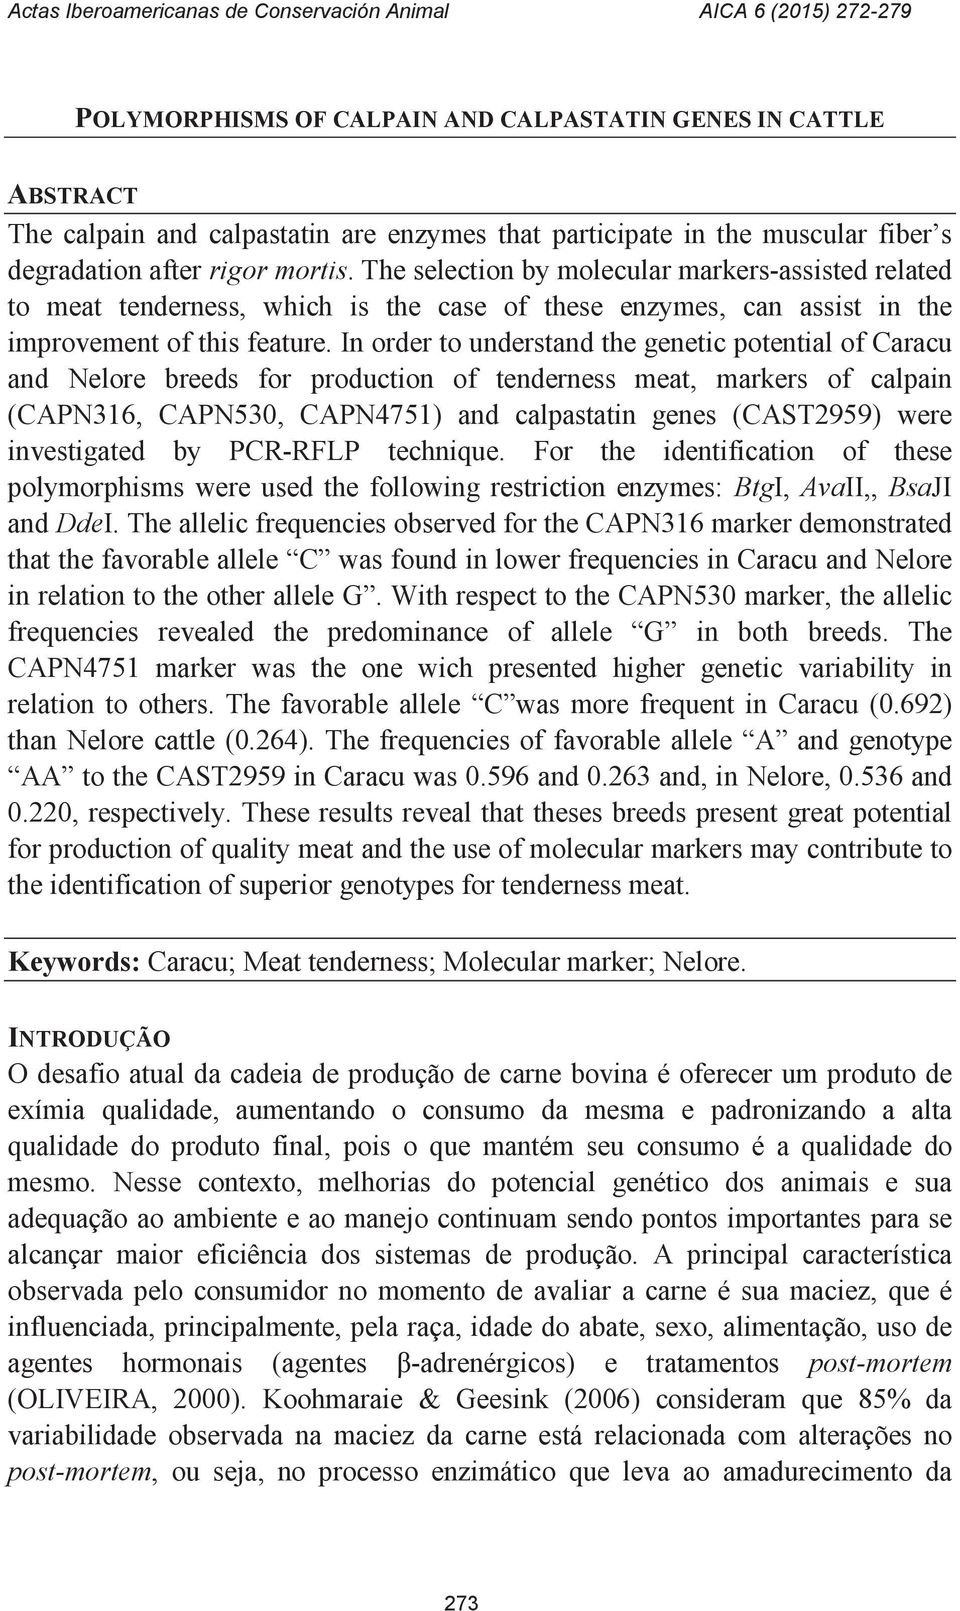 In order to understand the genetic potential of Caracu and Nelore breeds for production of tenderness meat, markers of calpain (CAPN316, CAPN530, CAPN4751) and calpastatin genes (CAST2959) were